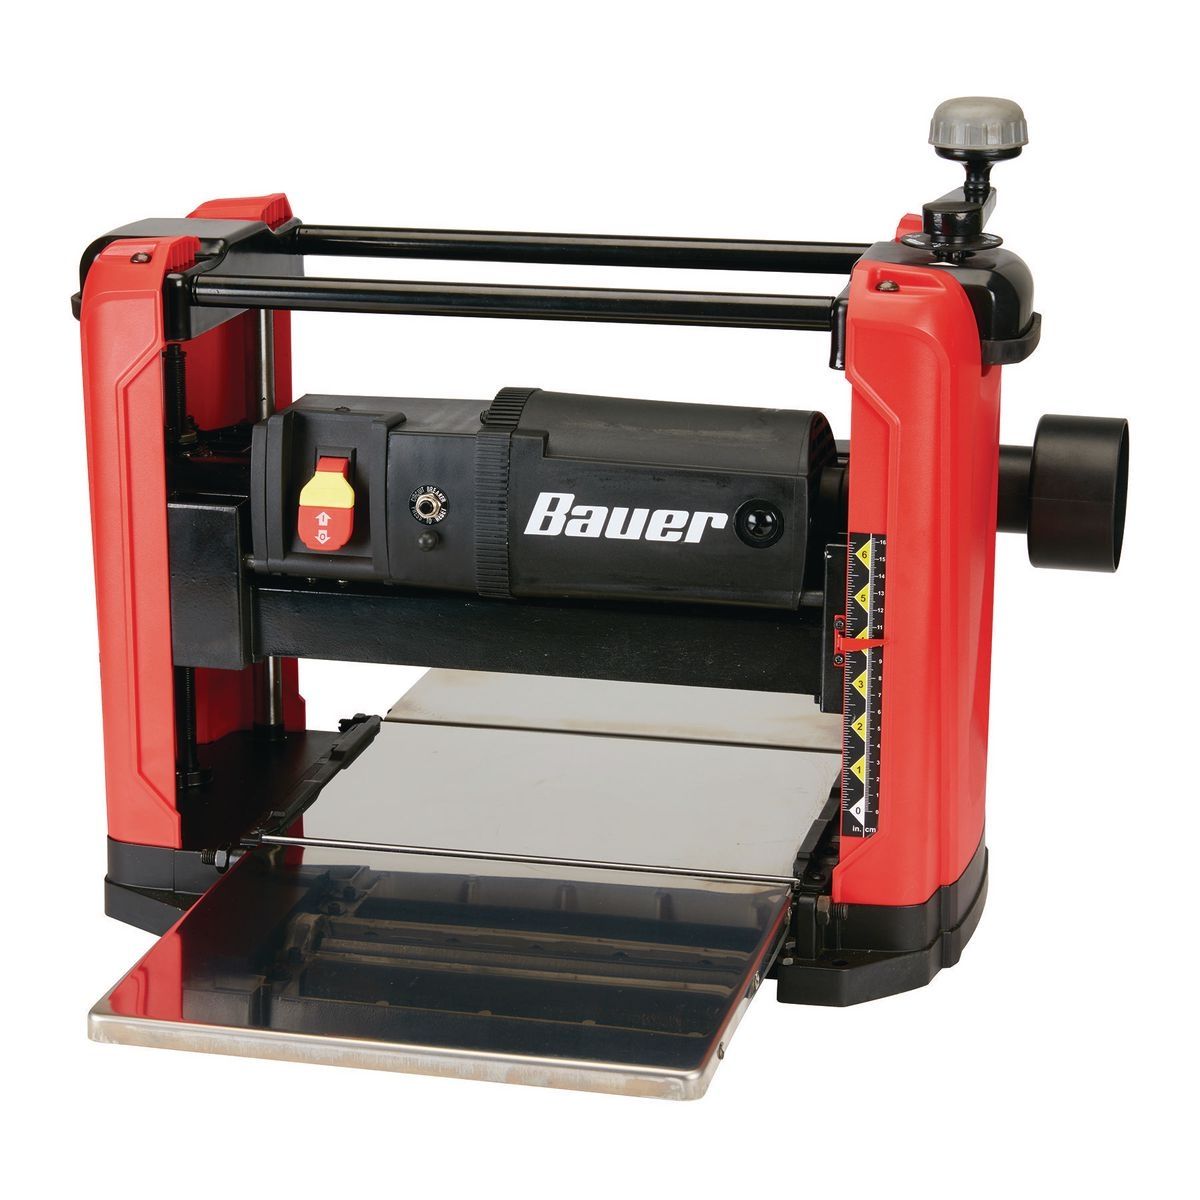 BAUER 15 Amp 12-1/2 in. Portable Thickness Planer